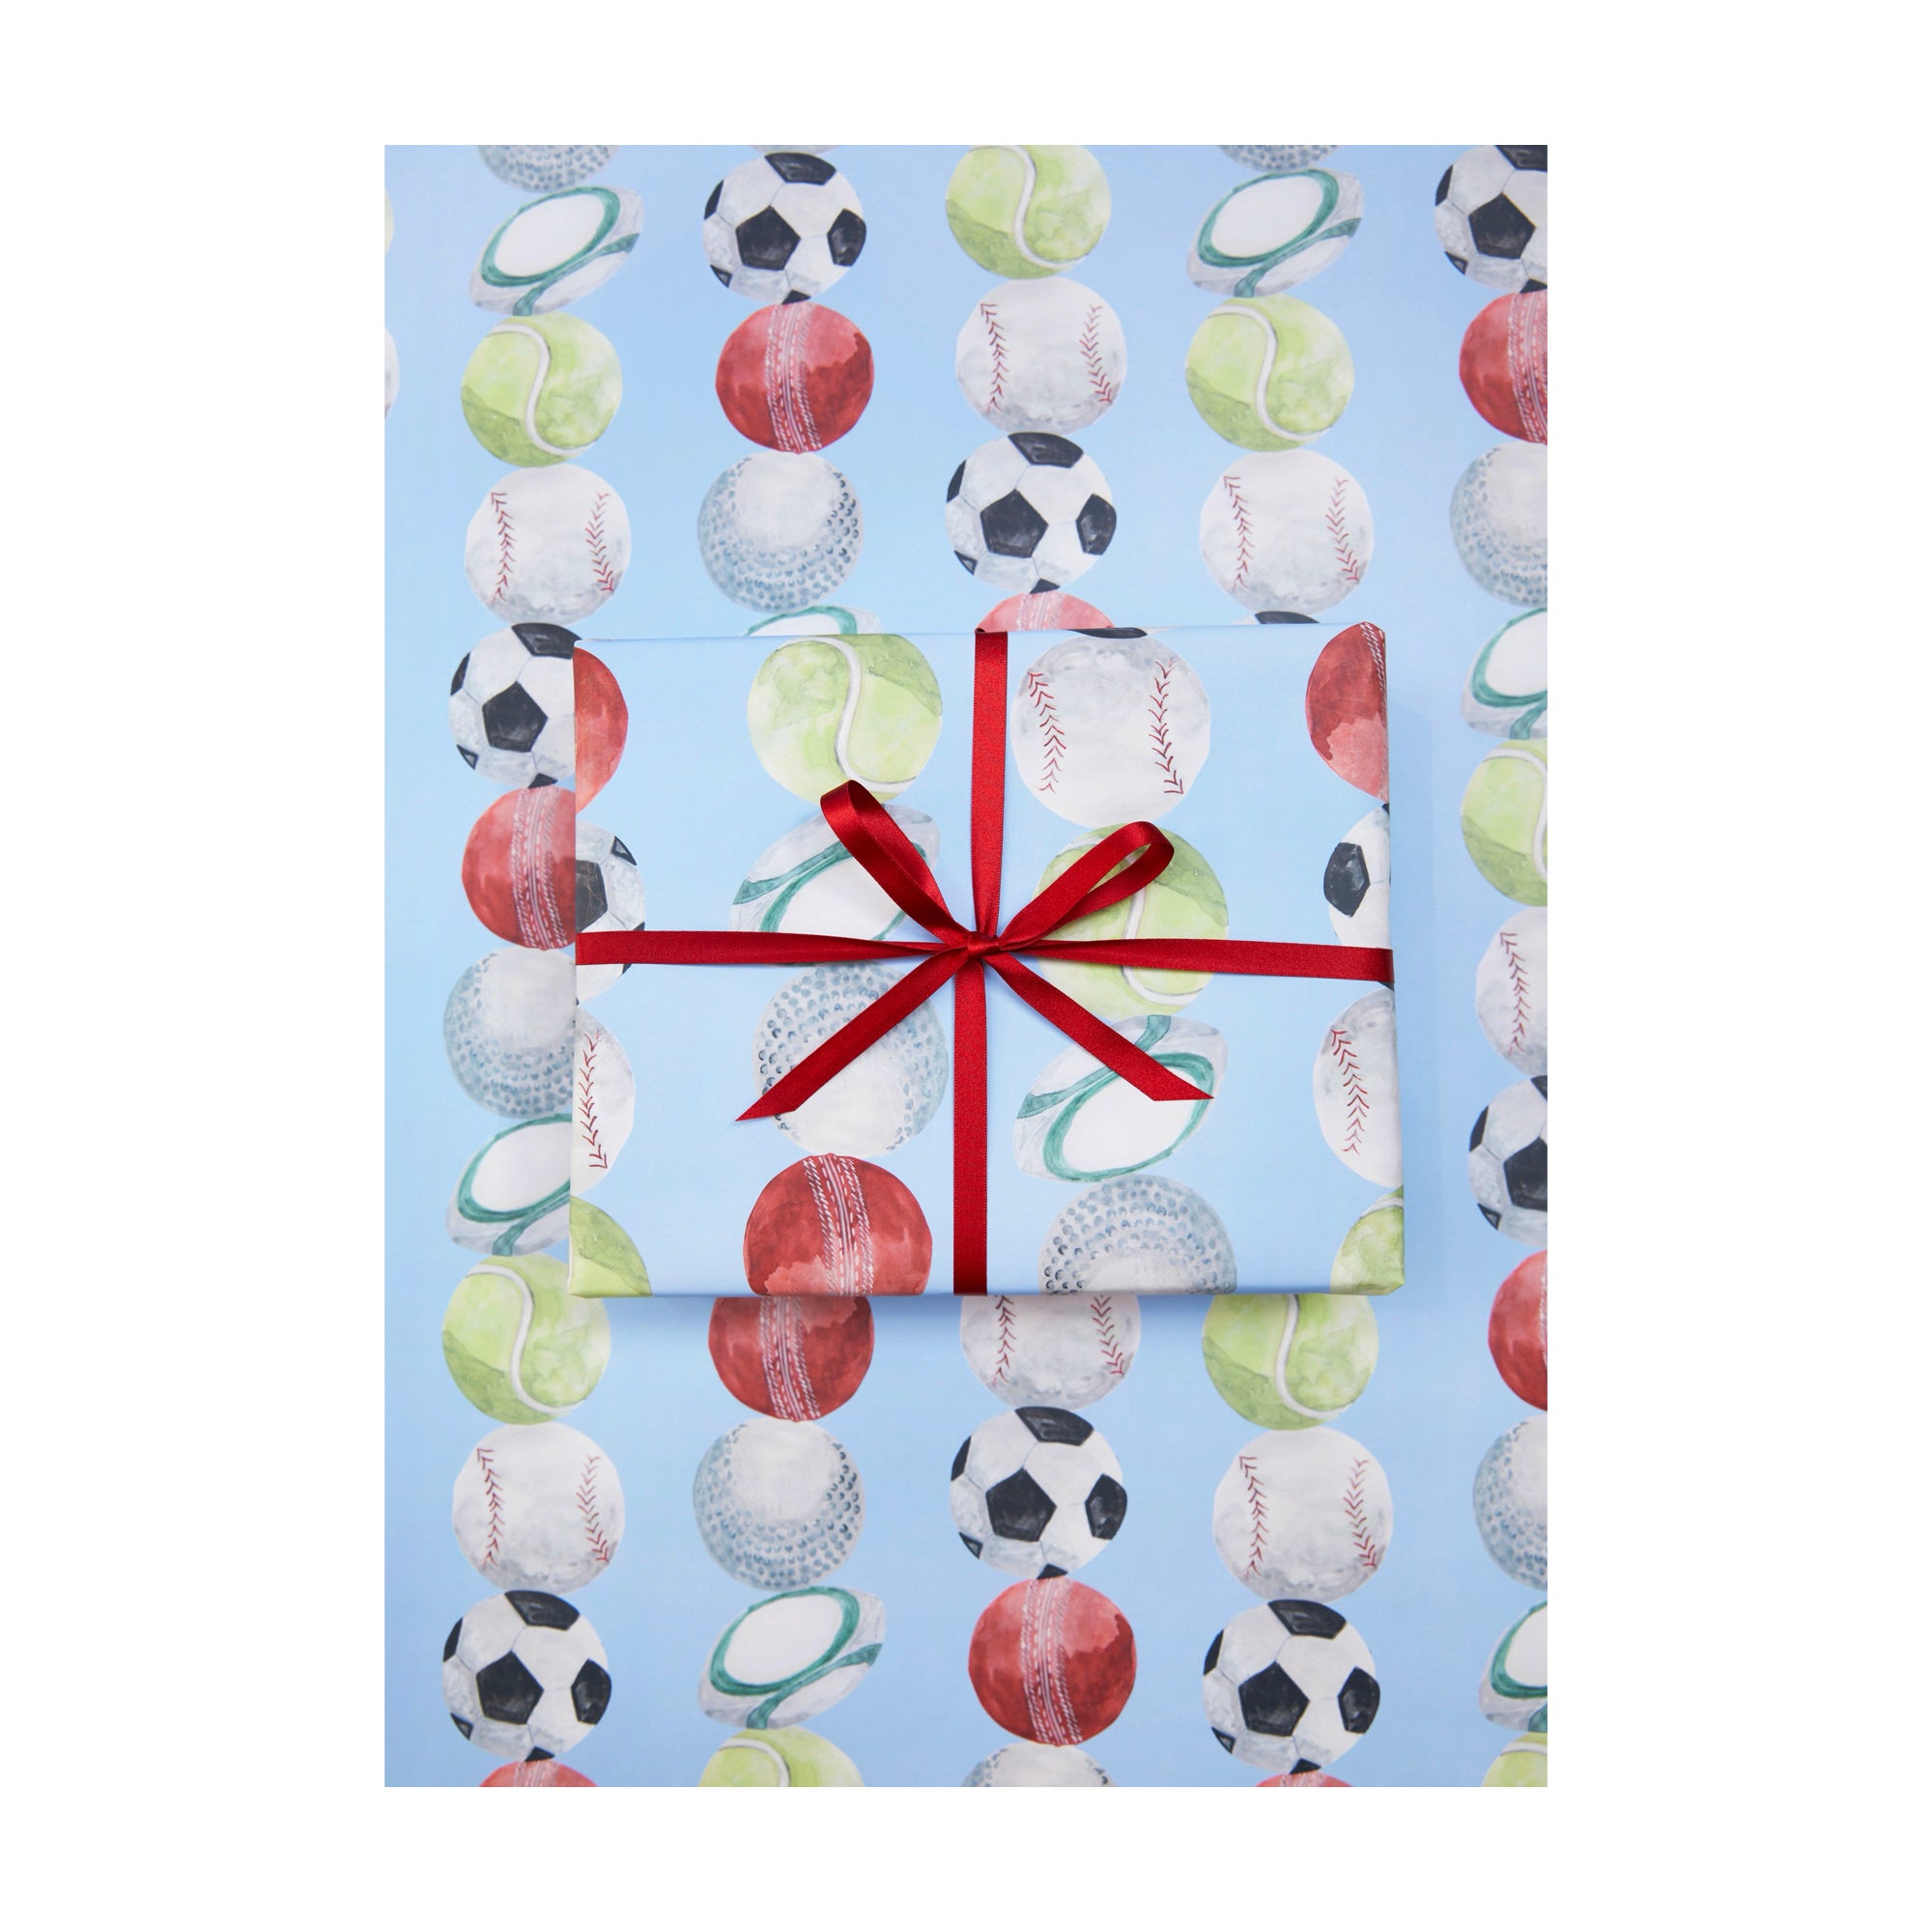 Wrapping paper with lots of kinds of sports balls illustrated on a blue background by Memo Press